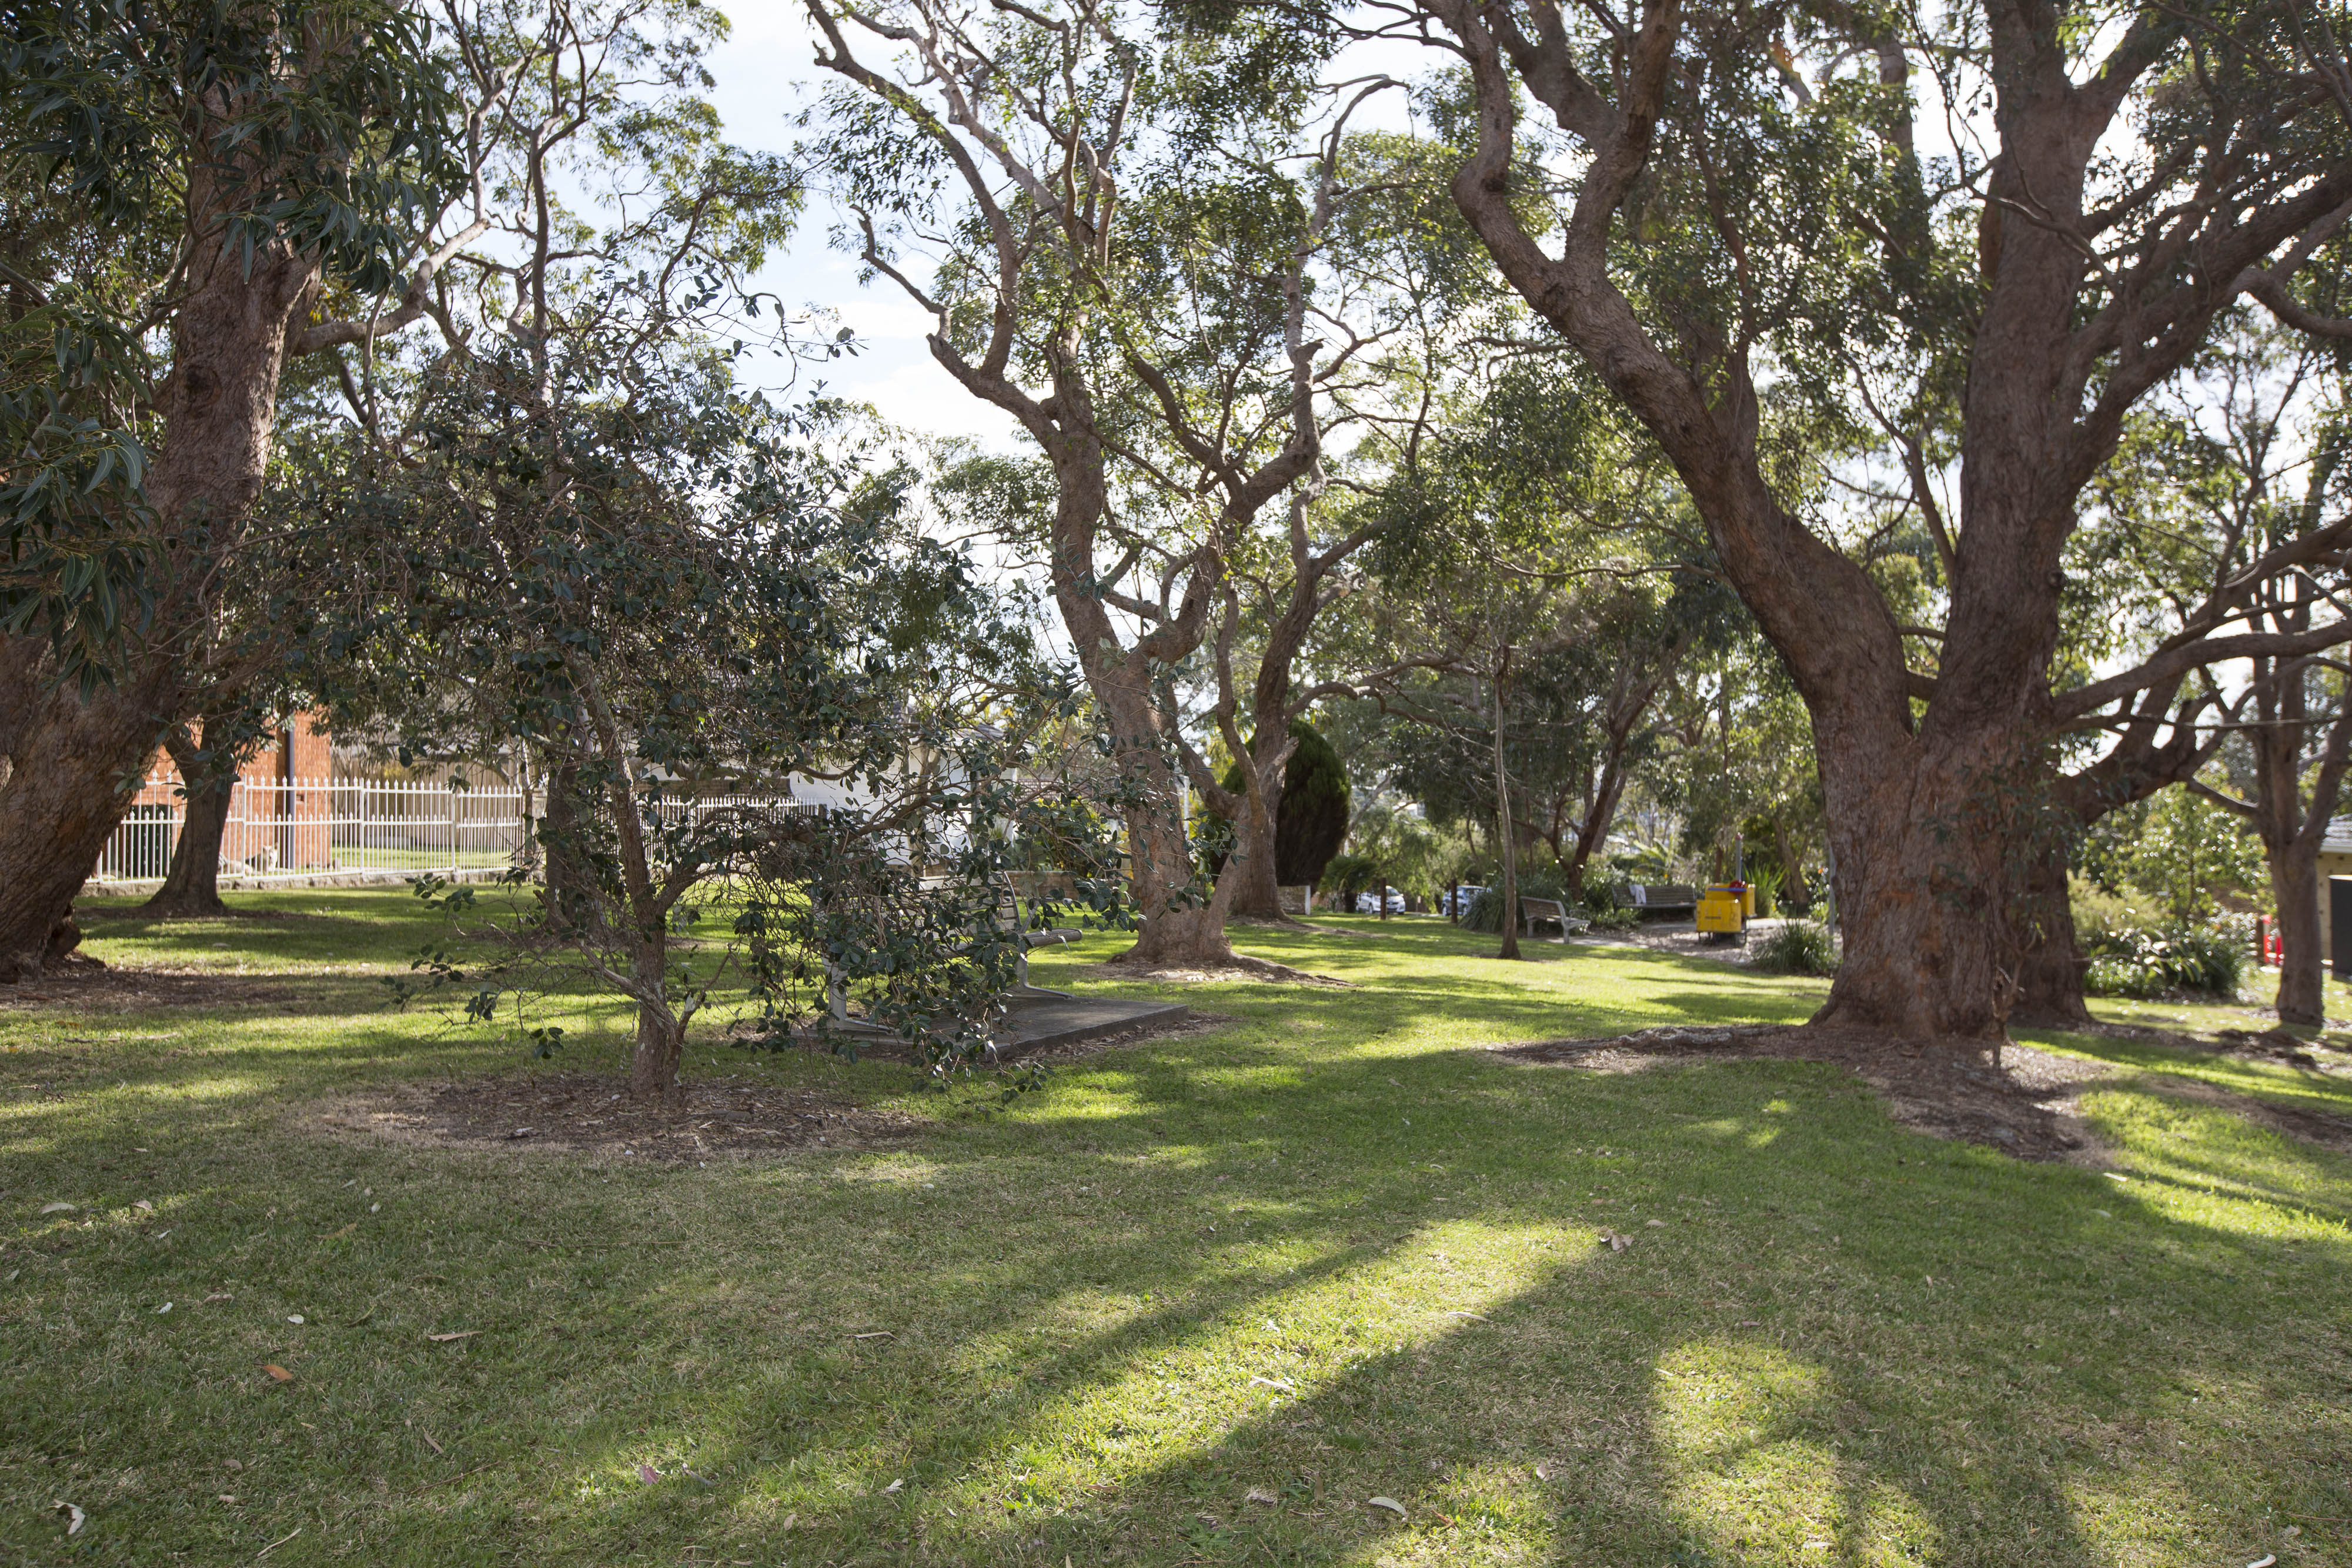 Reserve with open space grass area and mature trees